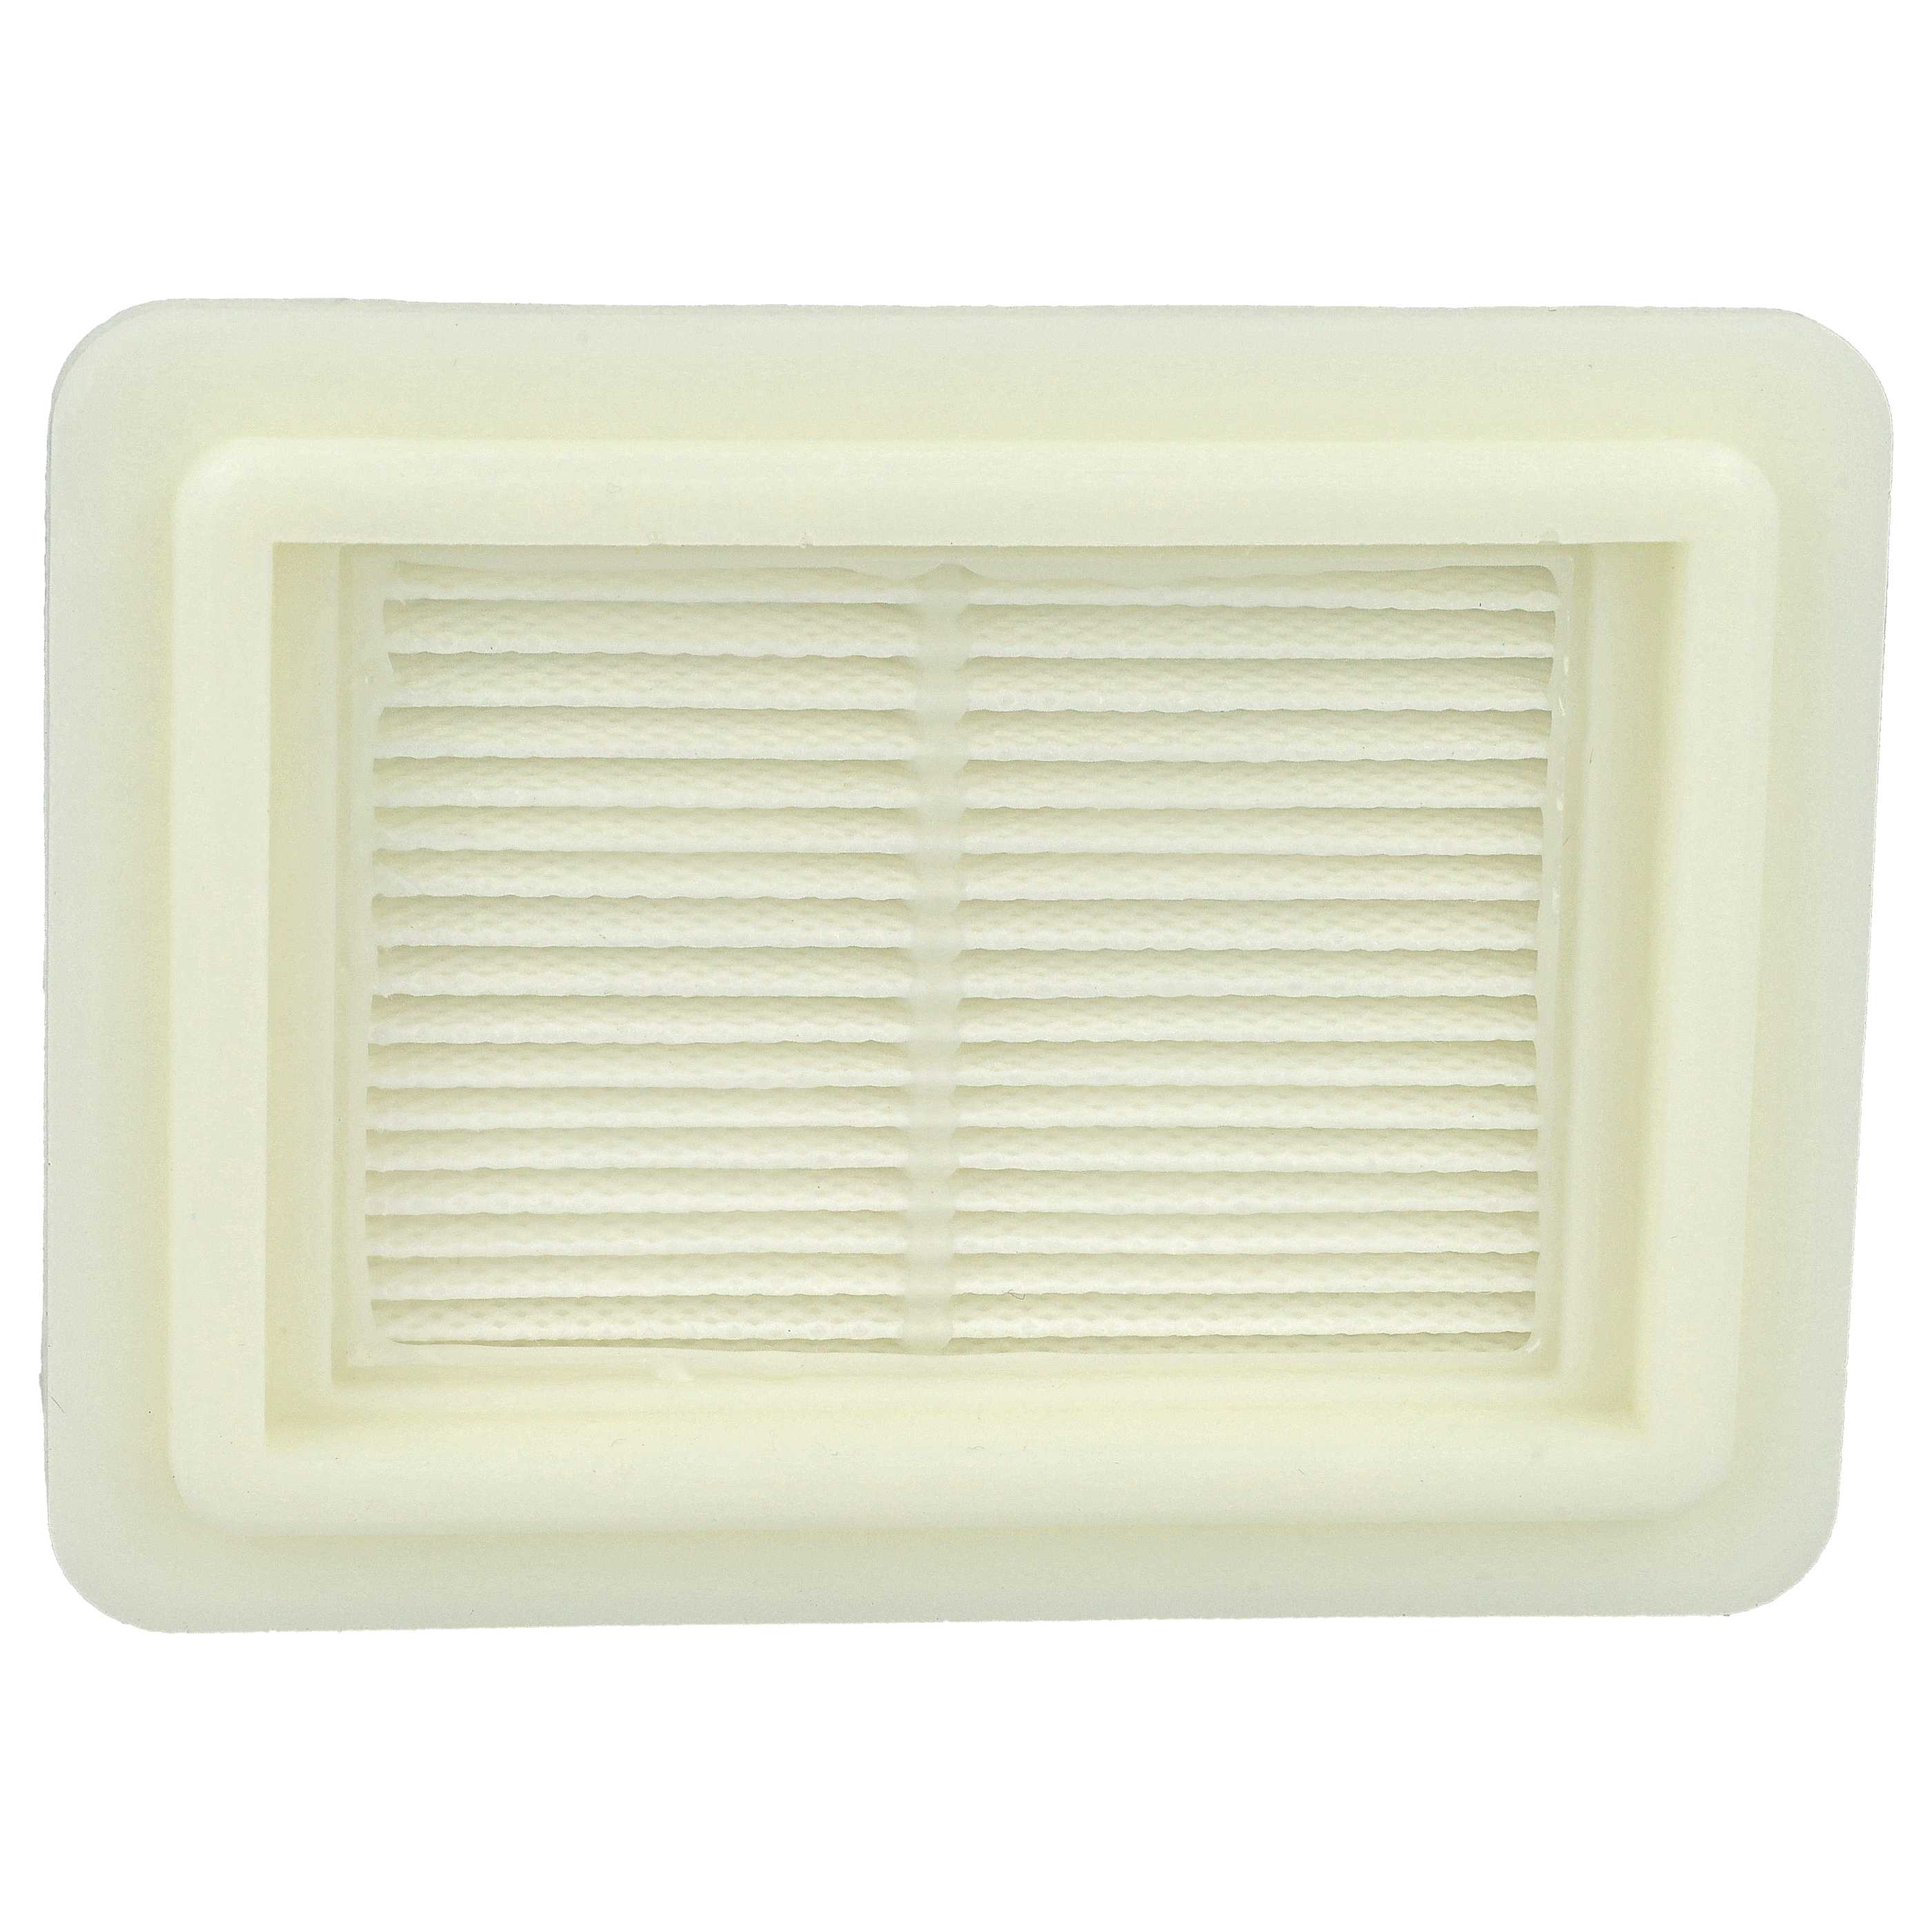 1x Filter replaces Bosch 2609256F44, 06033B9101 for BoschVacuum Cleaner